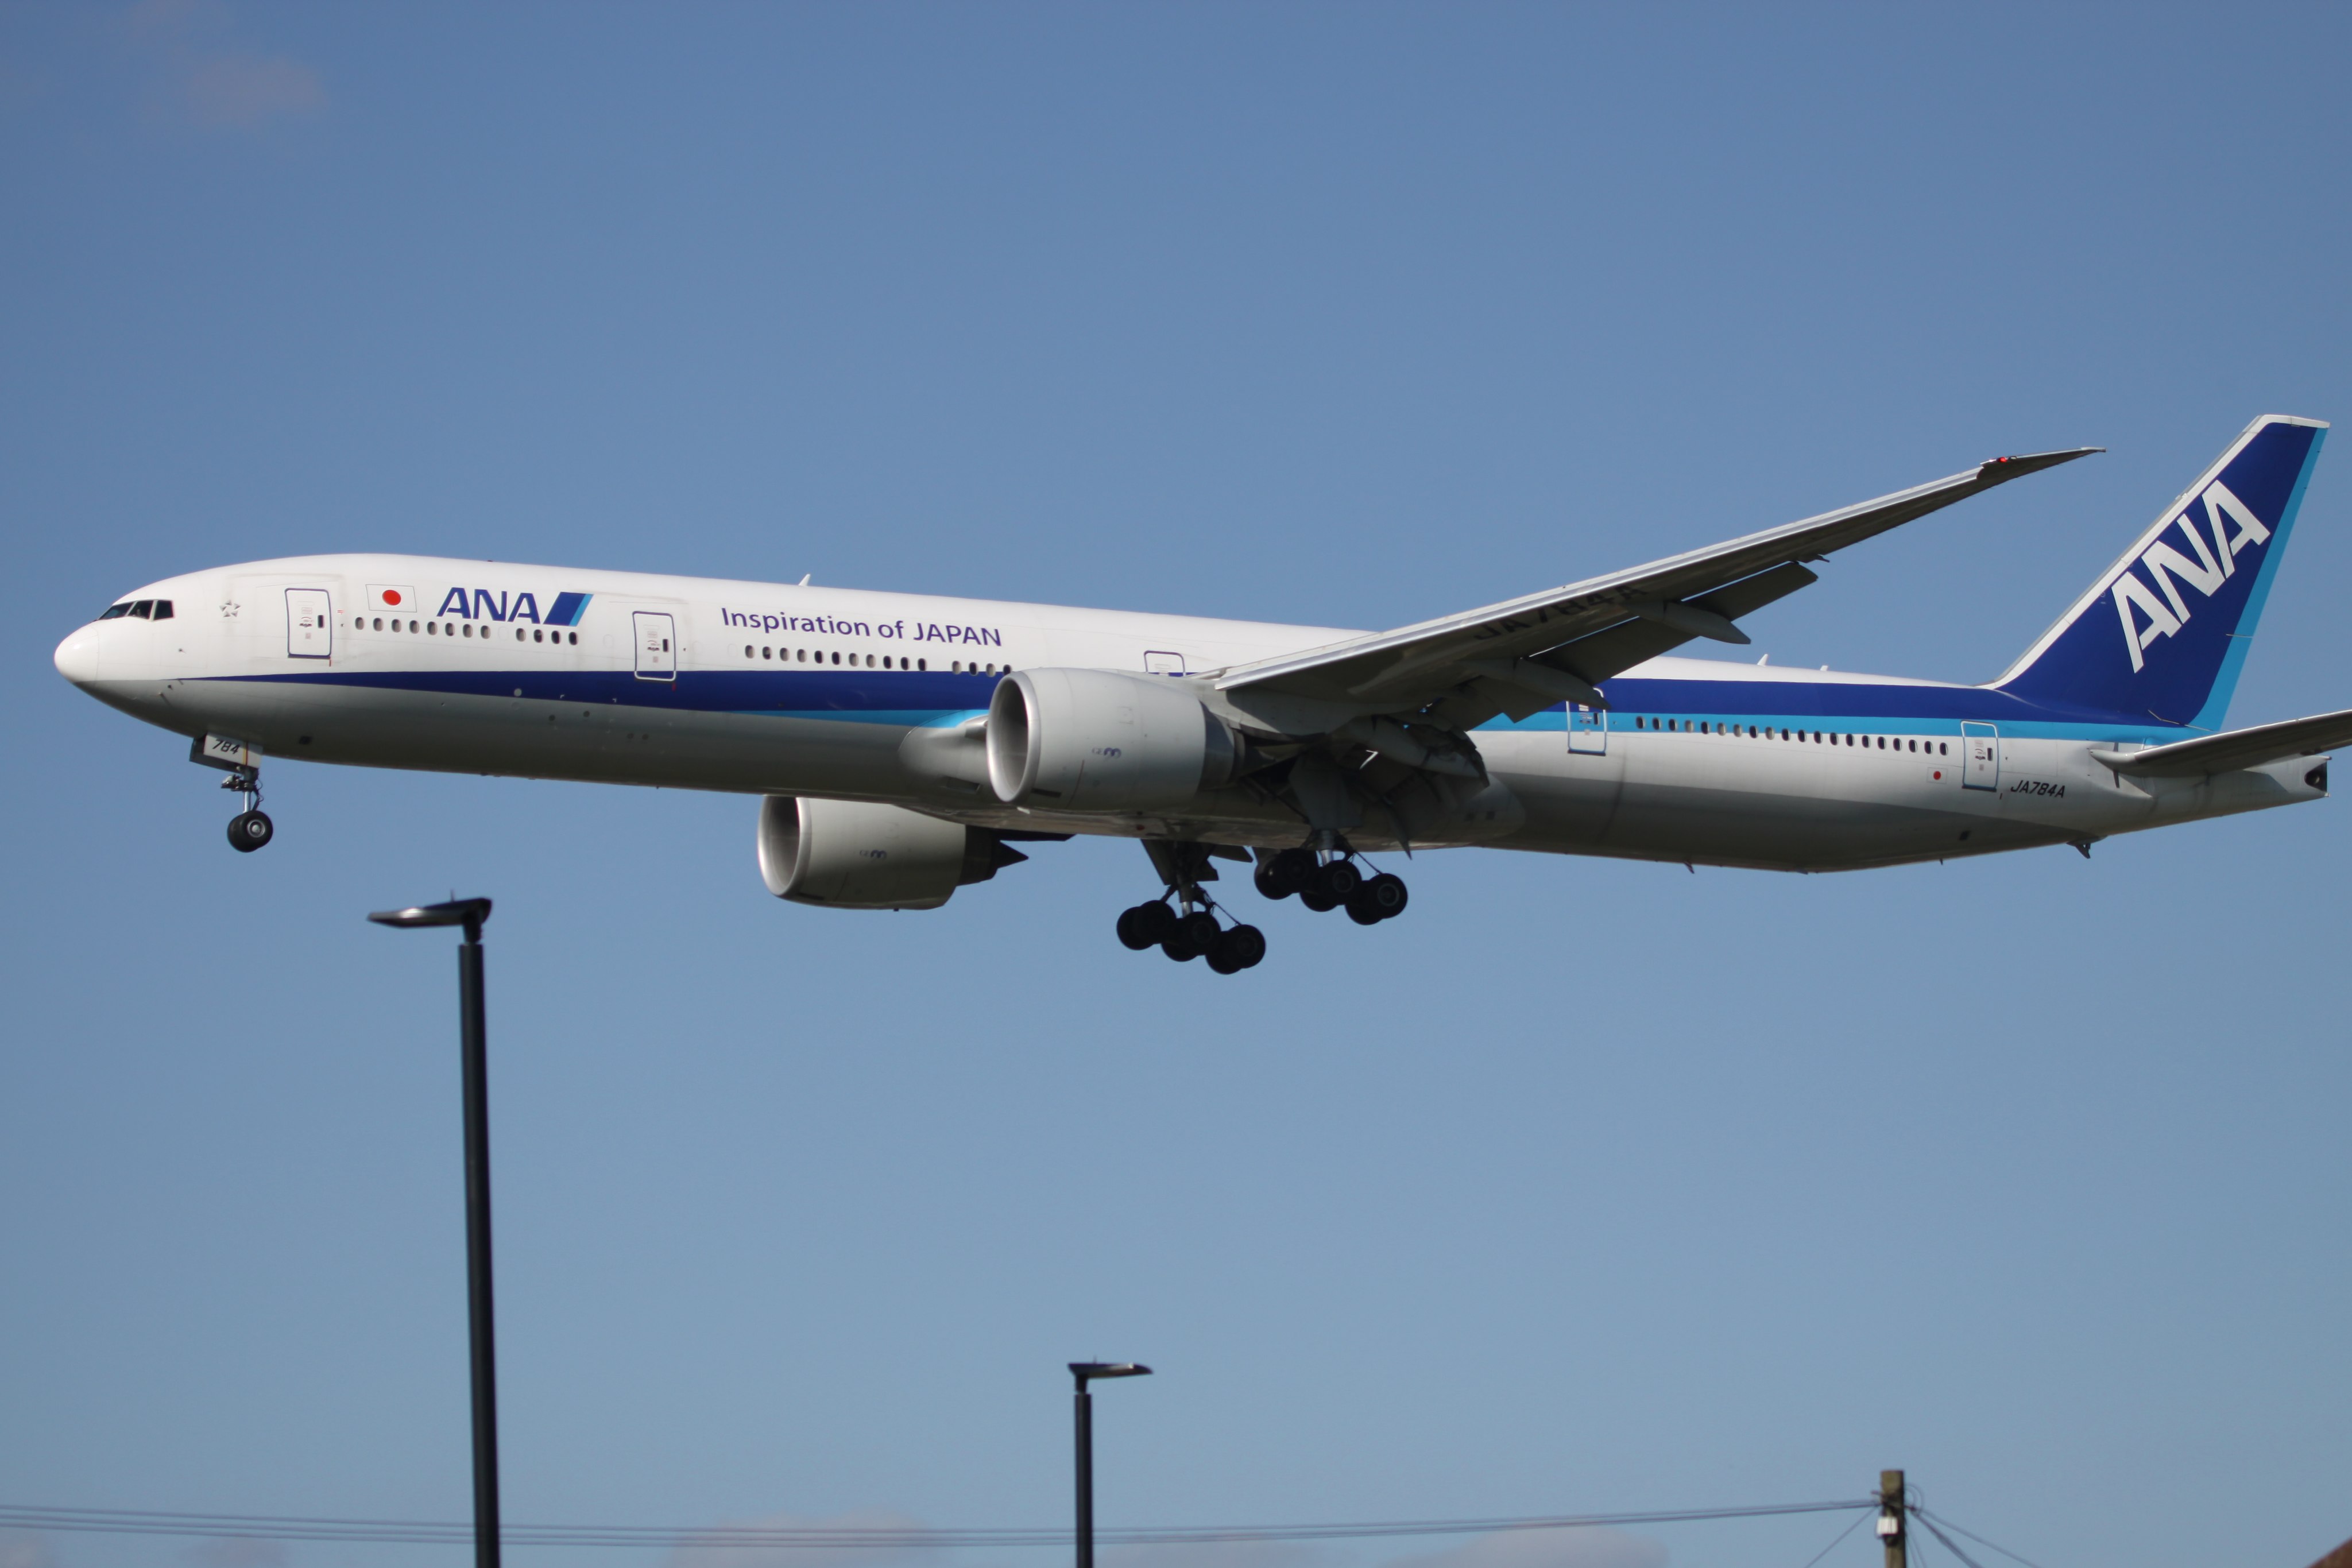 JA784A_Boeing_B.773_ANA_All_Nippon_With_Inspiration_Of_JAPAN_Titles_(13891244735)